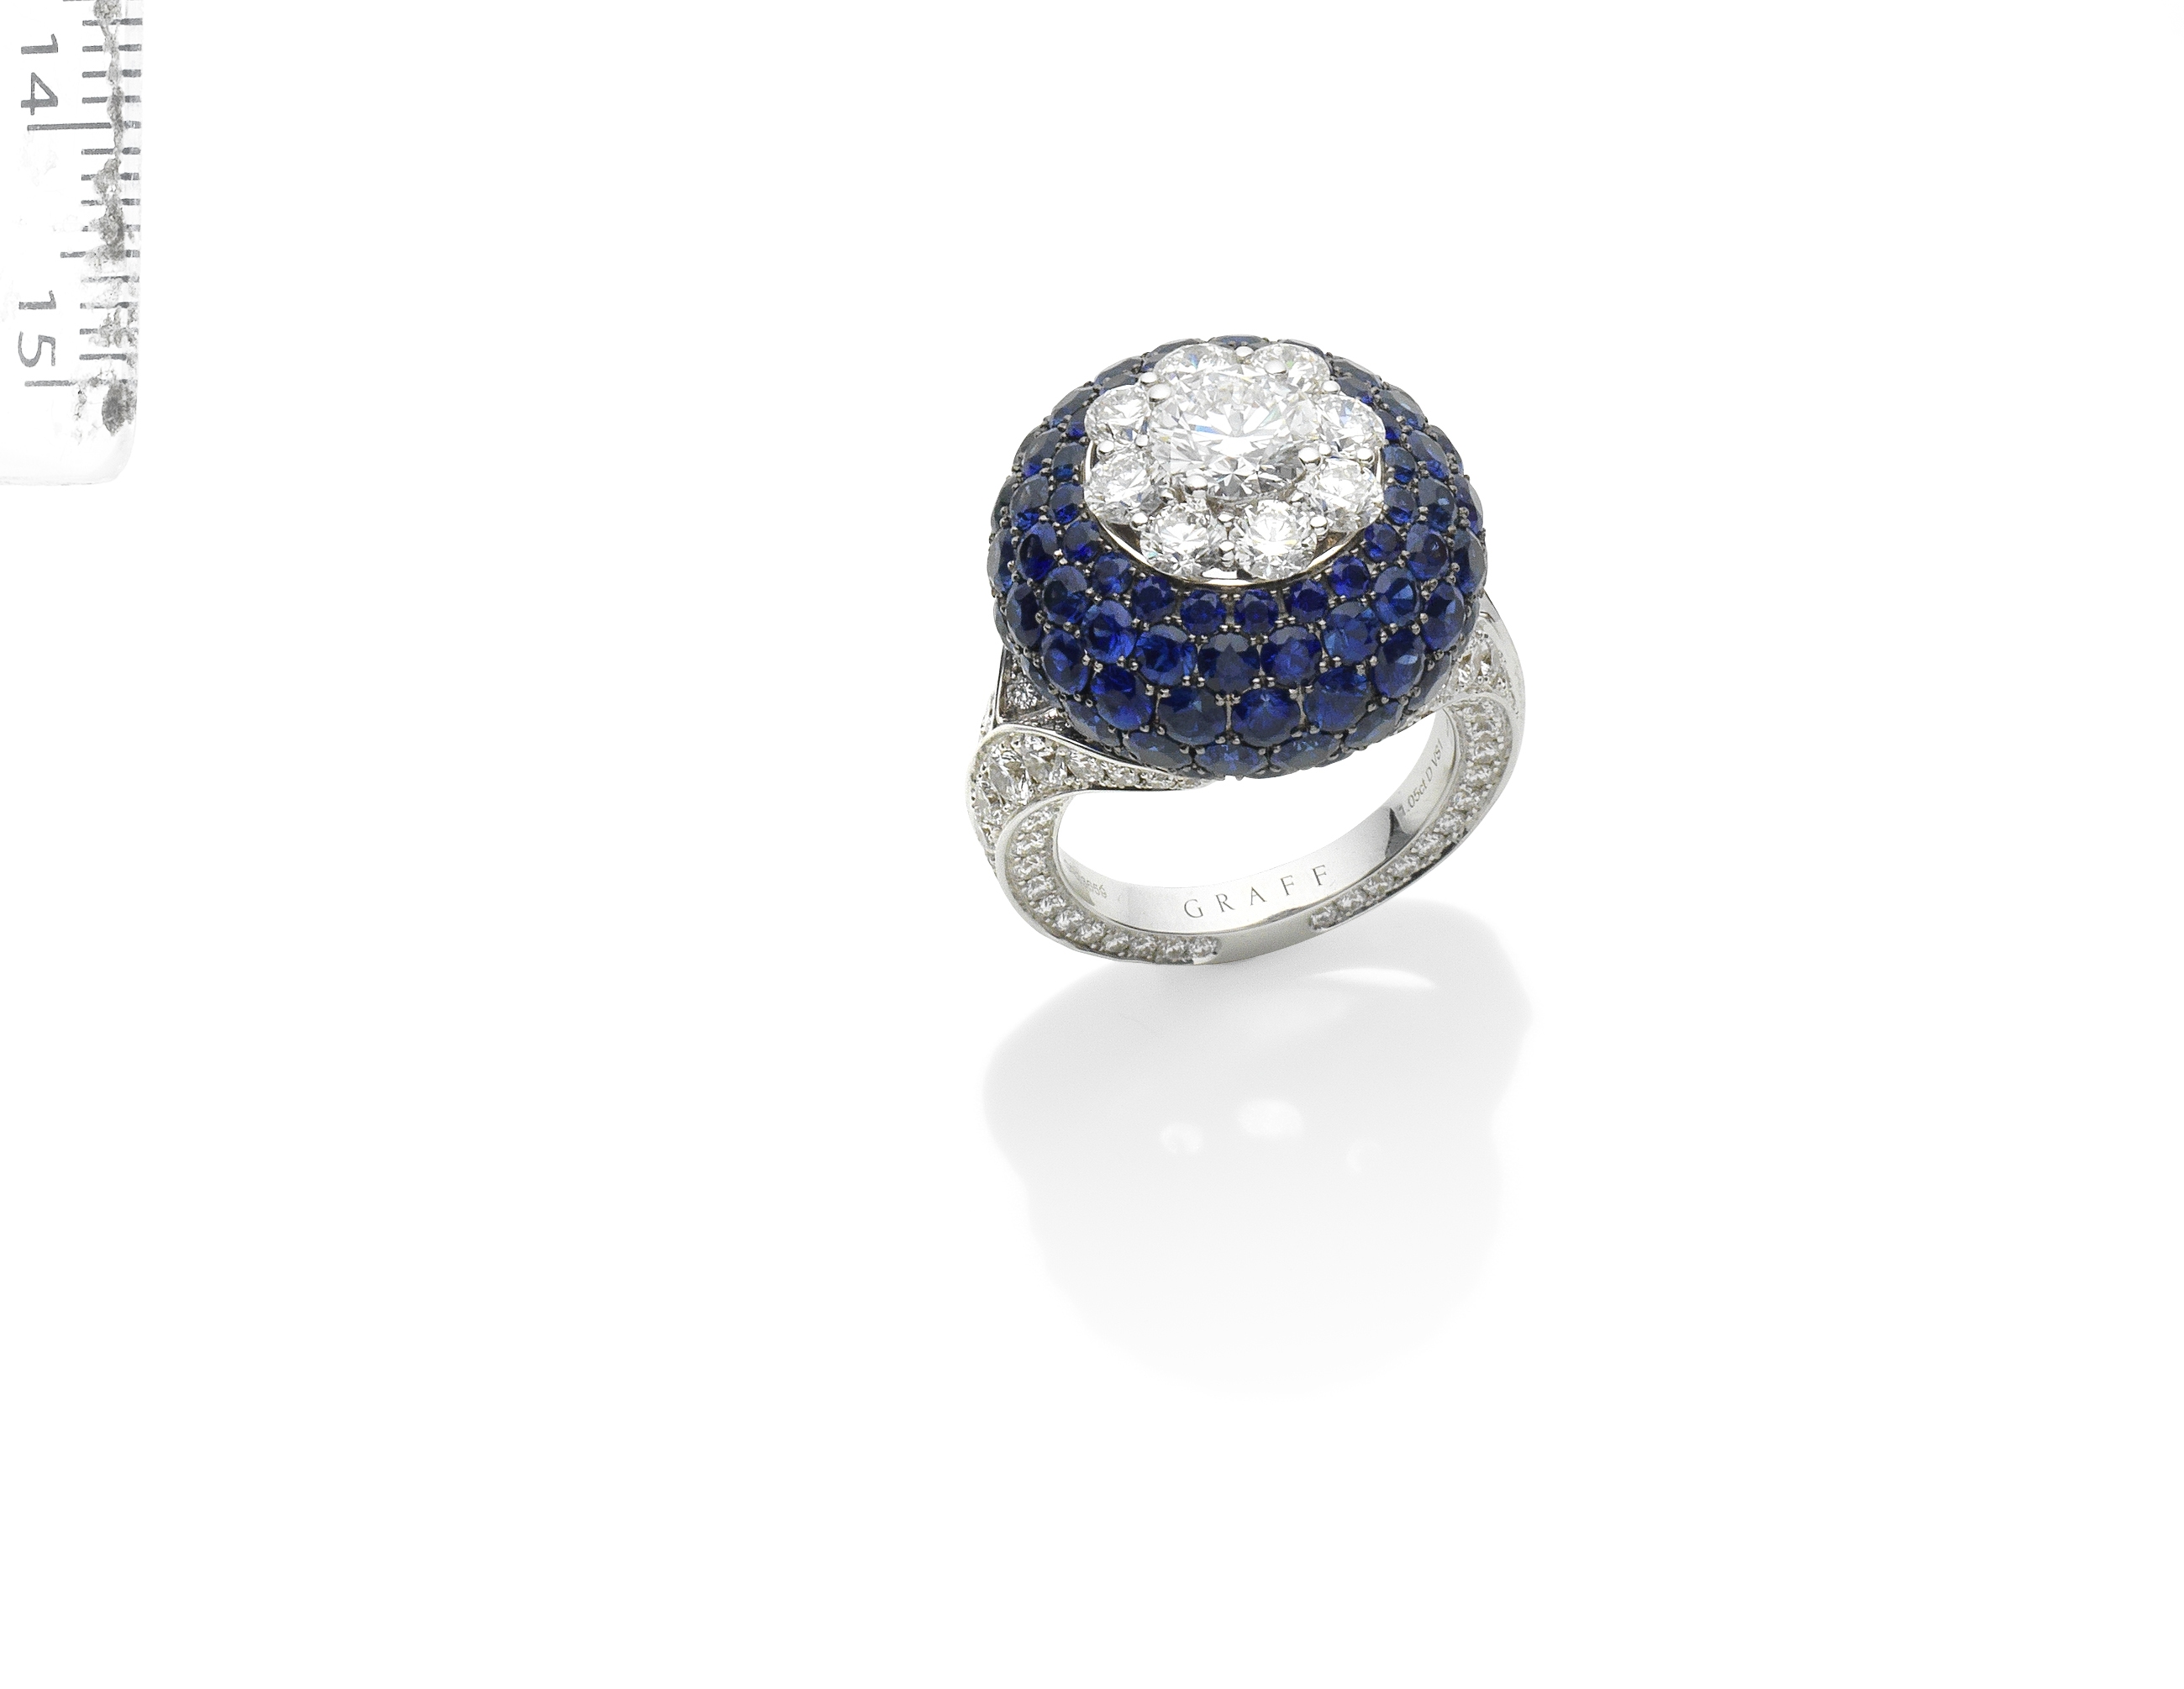 A SAPPHIRE AND DIAMOND 'HALO' RING, BY GRAFF